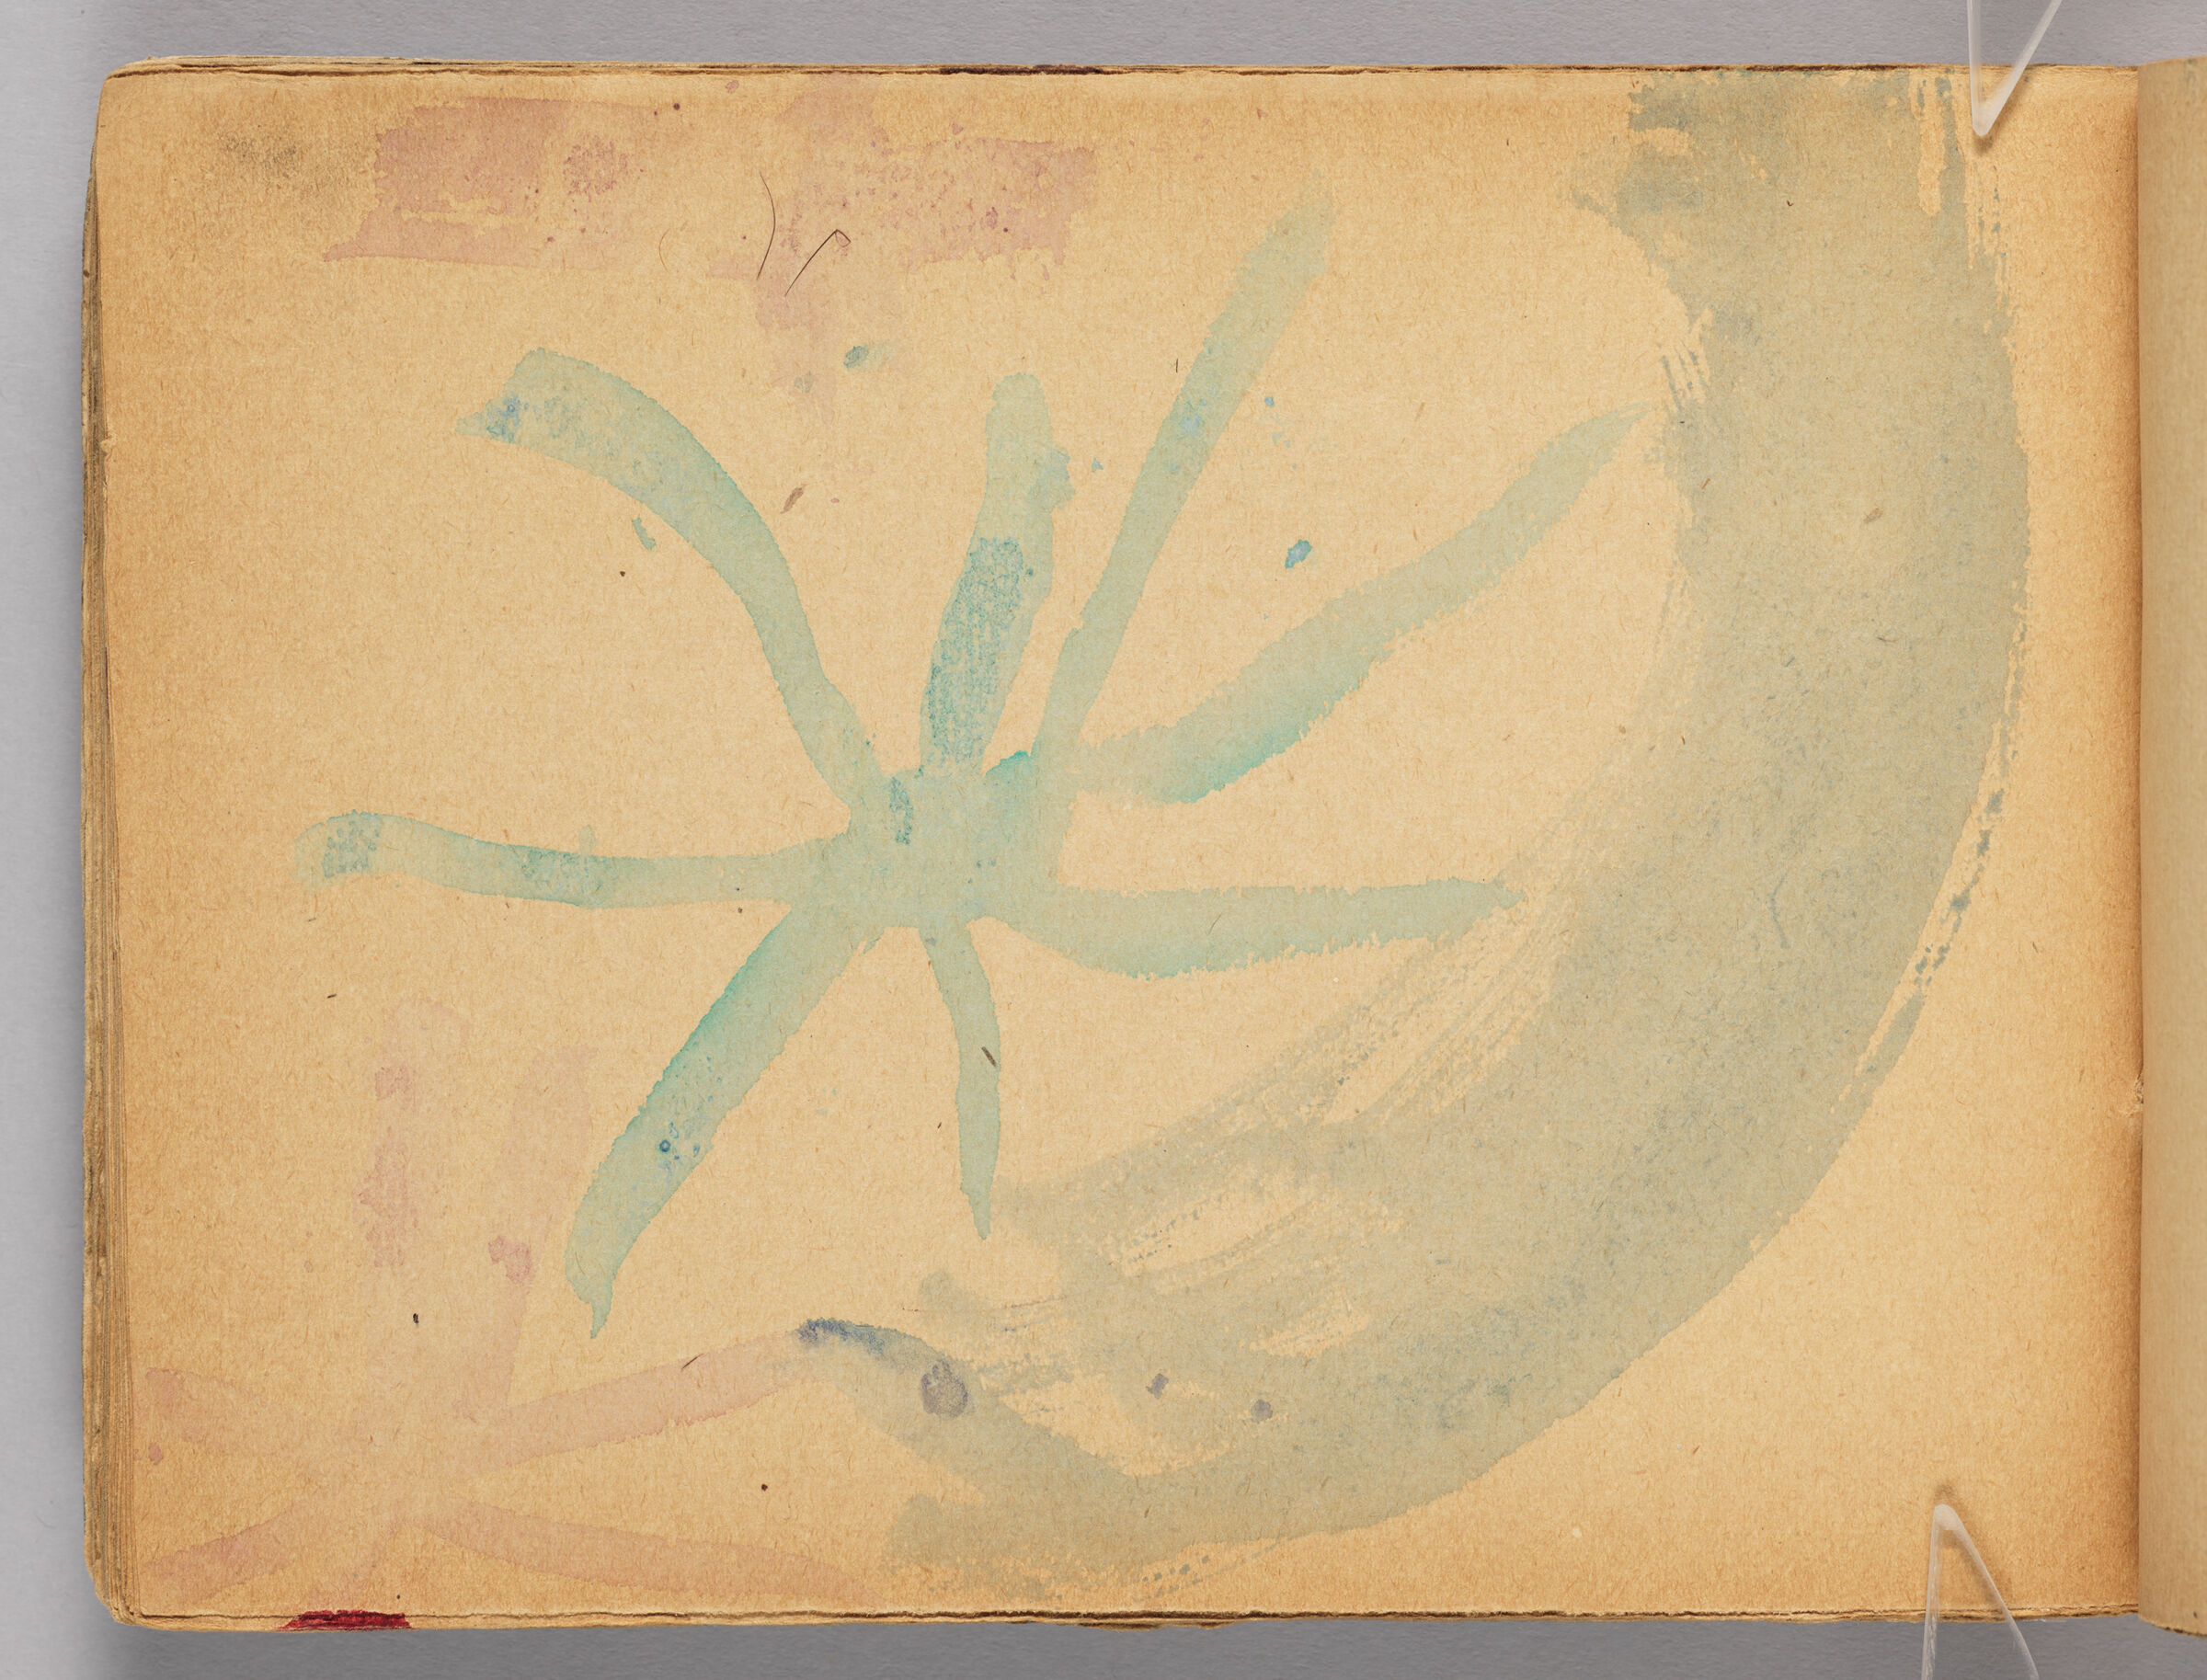 Untitled (Watercolor Sketch, Left Page); Untitled (Watercolor Transfer, Right Page)